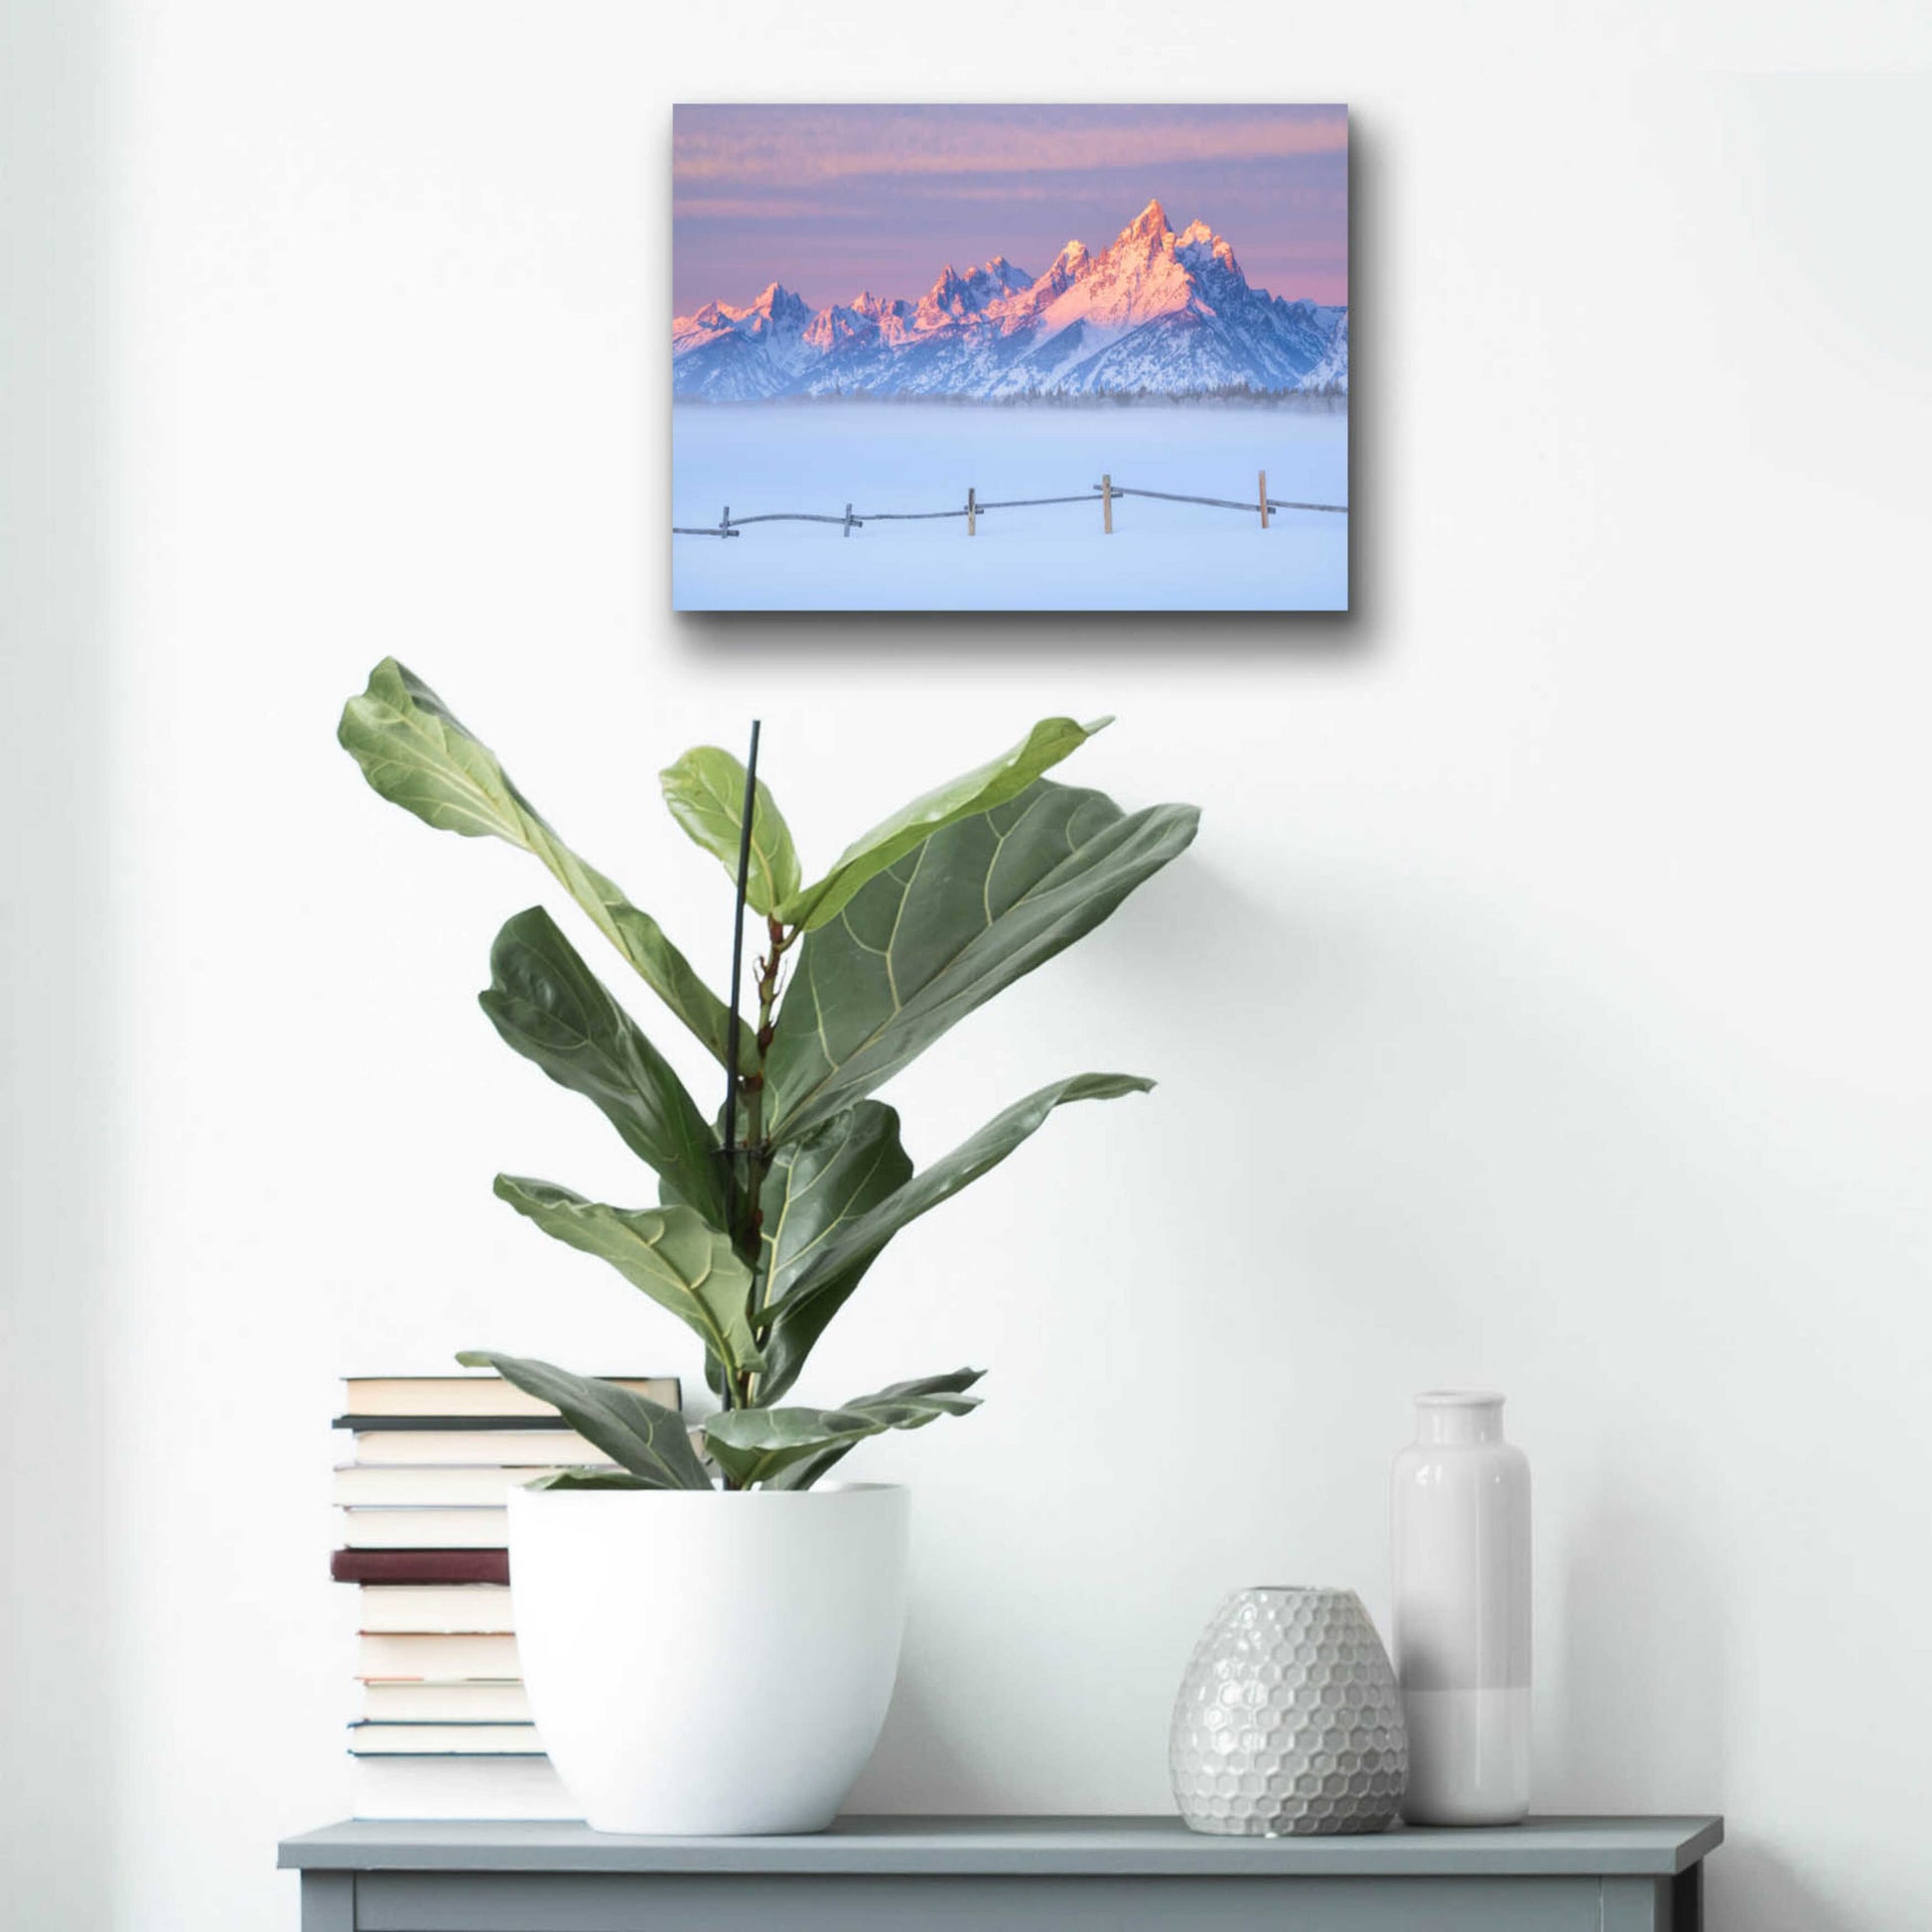 Epic Art 'Let there be Light - Grand Teton National Park' by Darren White, Acrylic Glass Wall Art,16x12